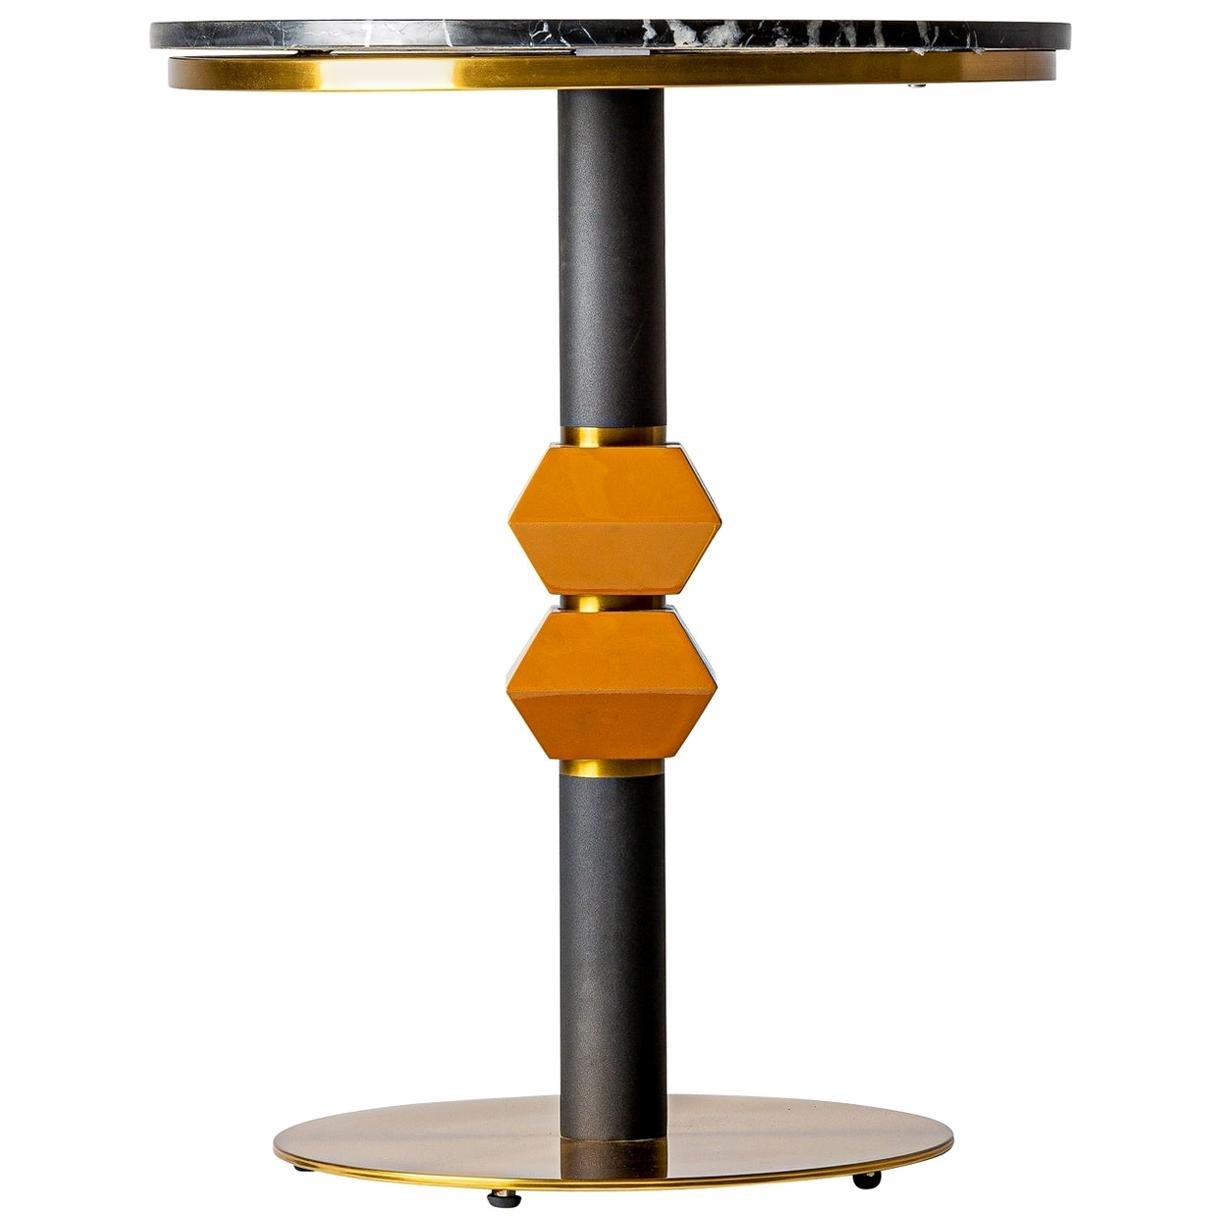 1980s Italian Design Style Round Black Marble and Gilt Pedestal Table